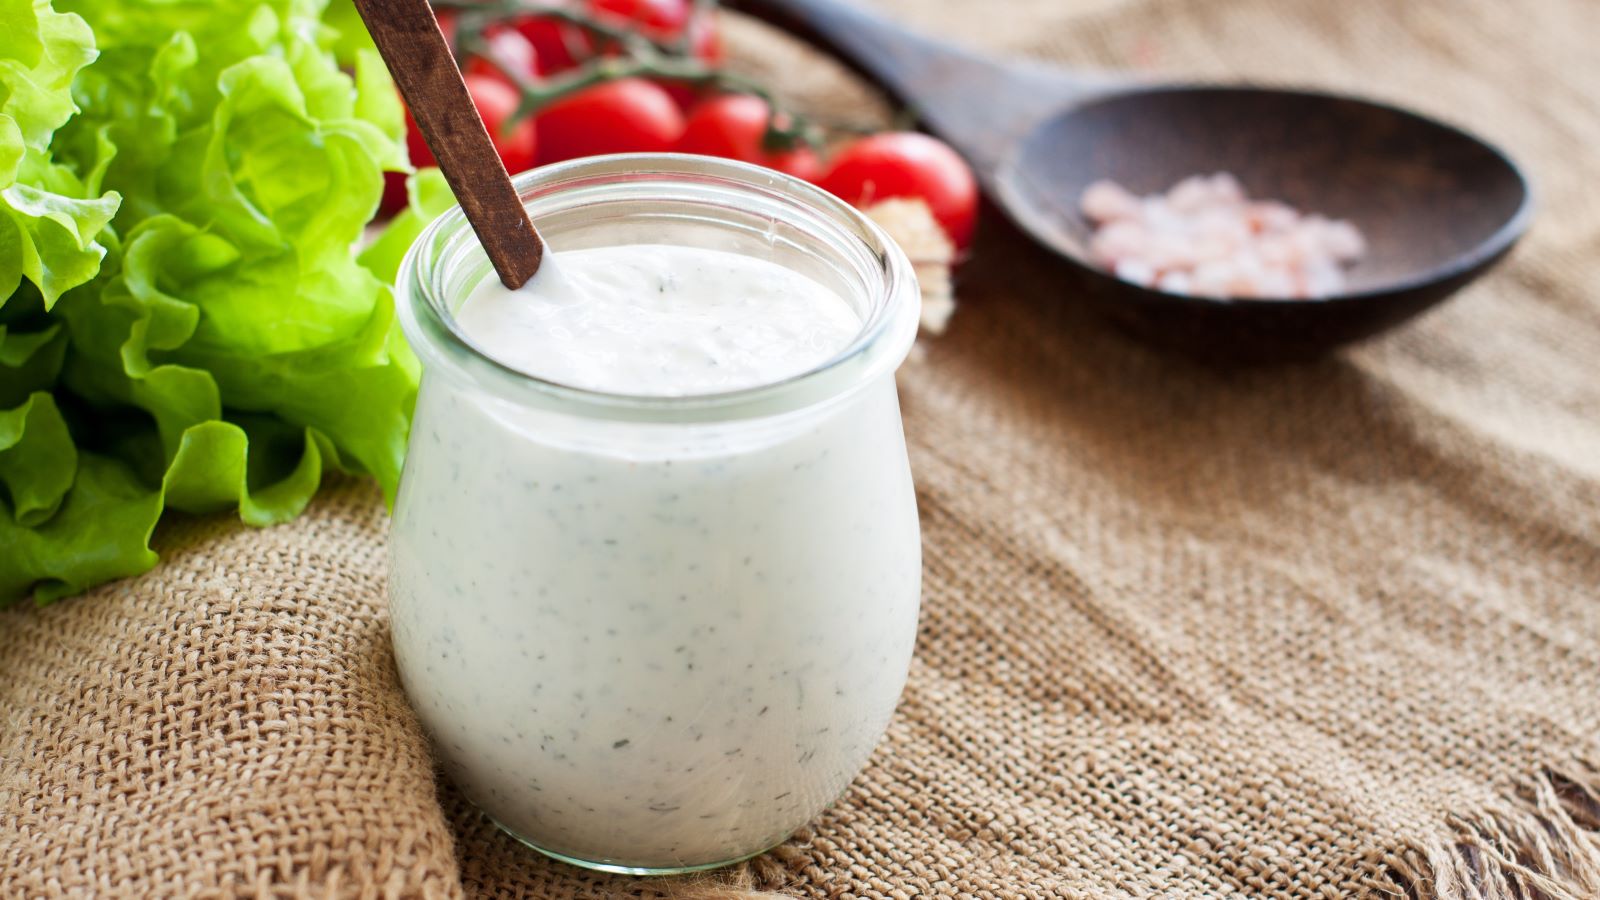 These Are the 3 Worst Salad Dressings for Your Health